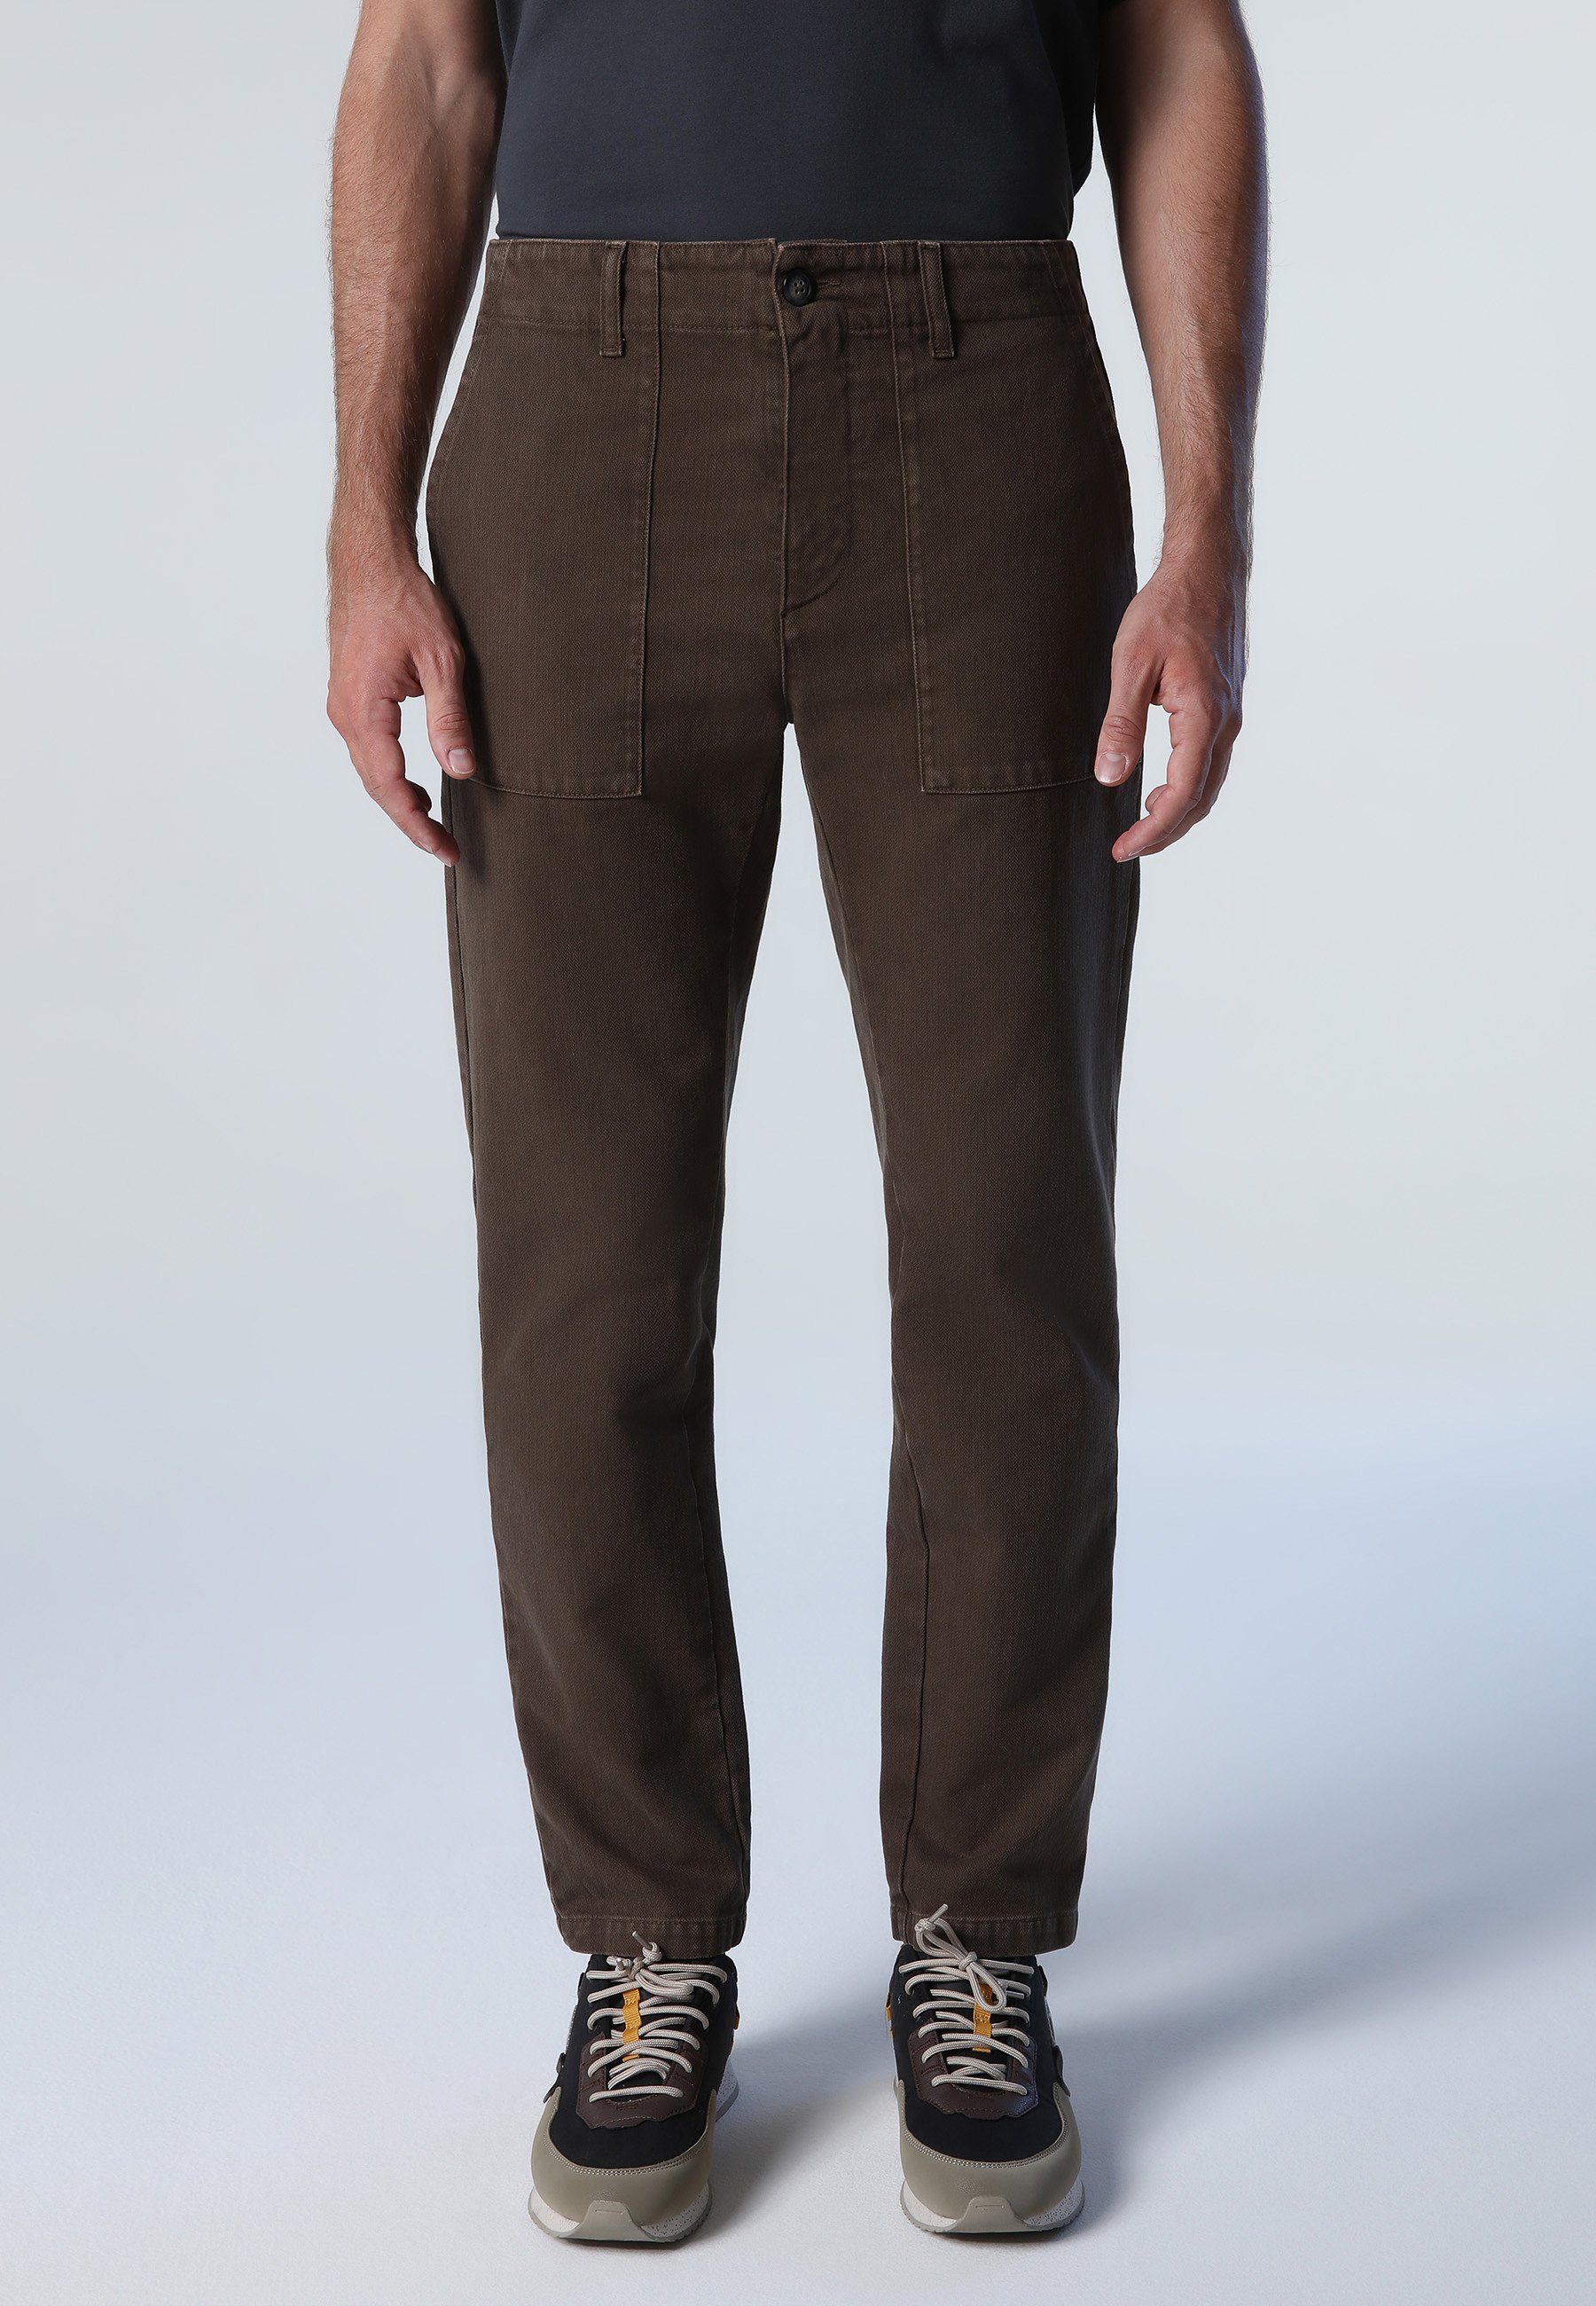 North Sails Cargohose Cargohose Recycled cotton trousers COCOA